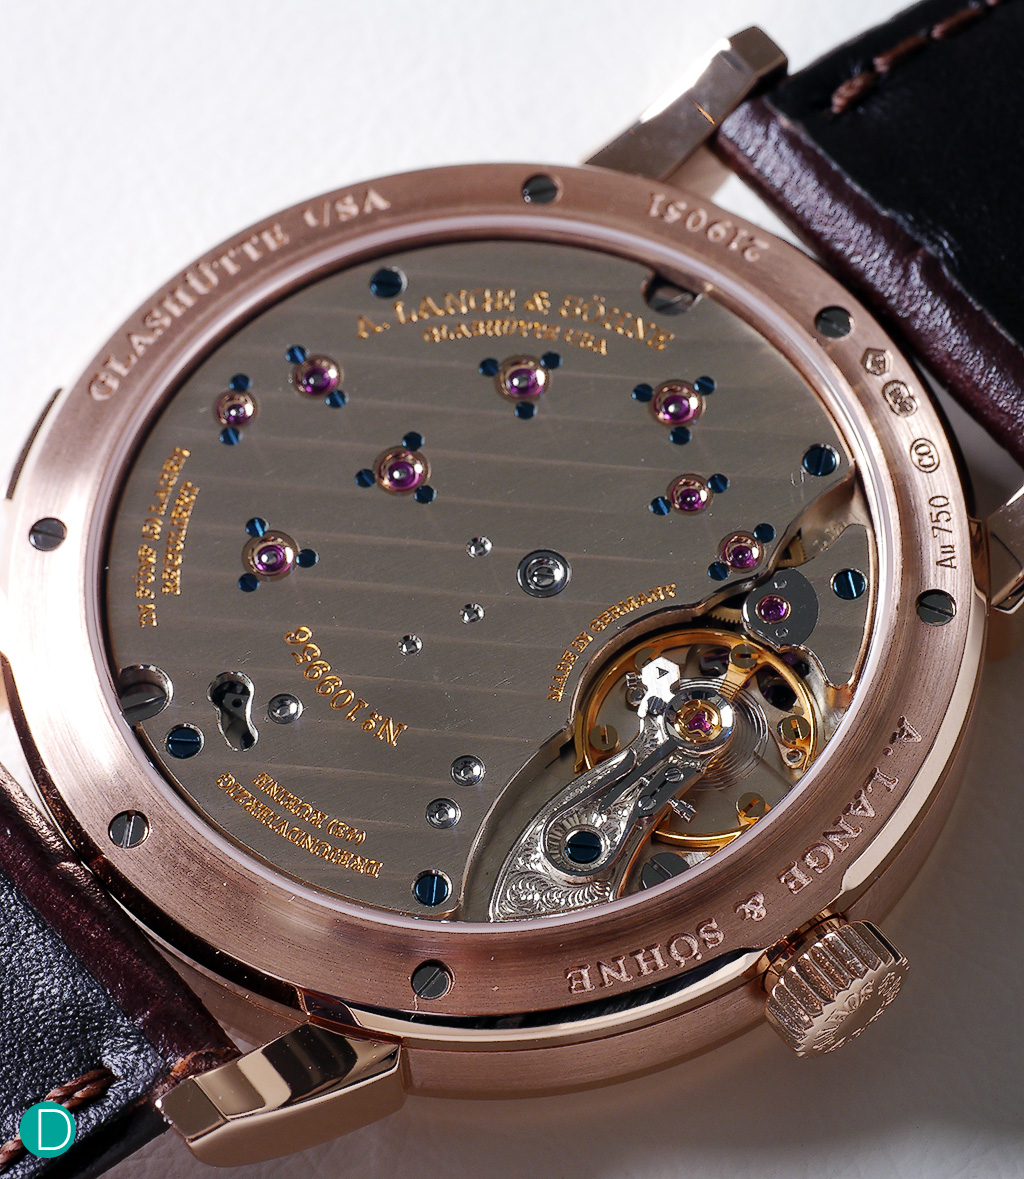 The new Lange 1 movement. Caliber L121.1, with the inhouse manufactured balance system with eccentric weights.